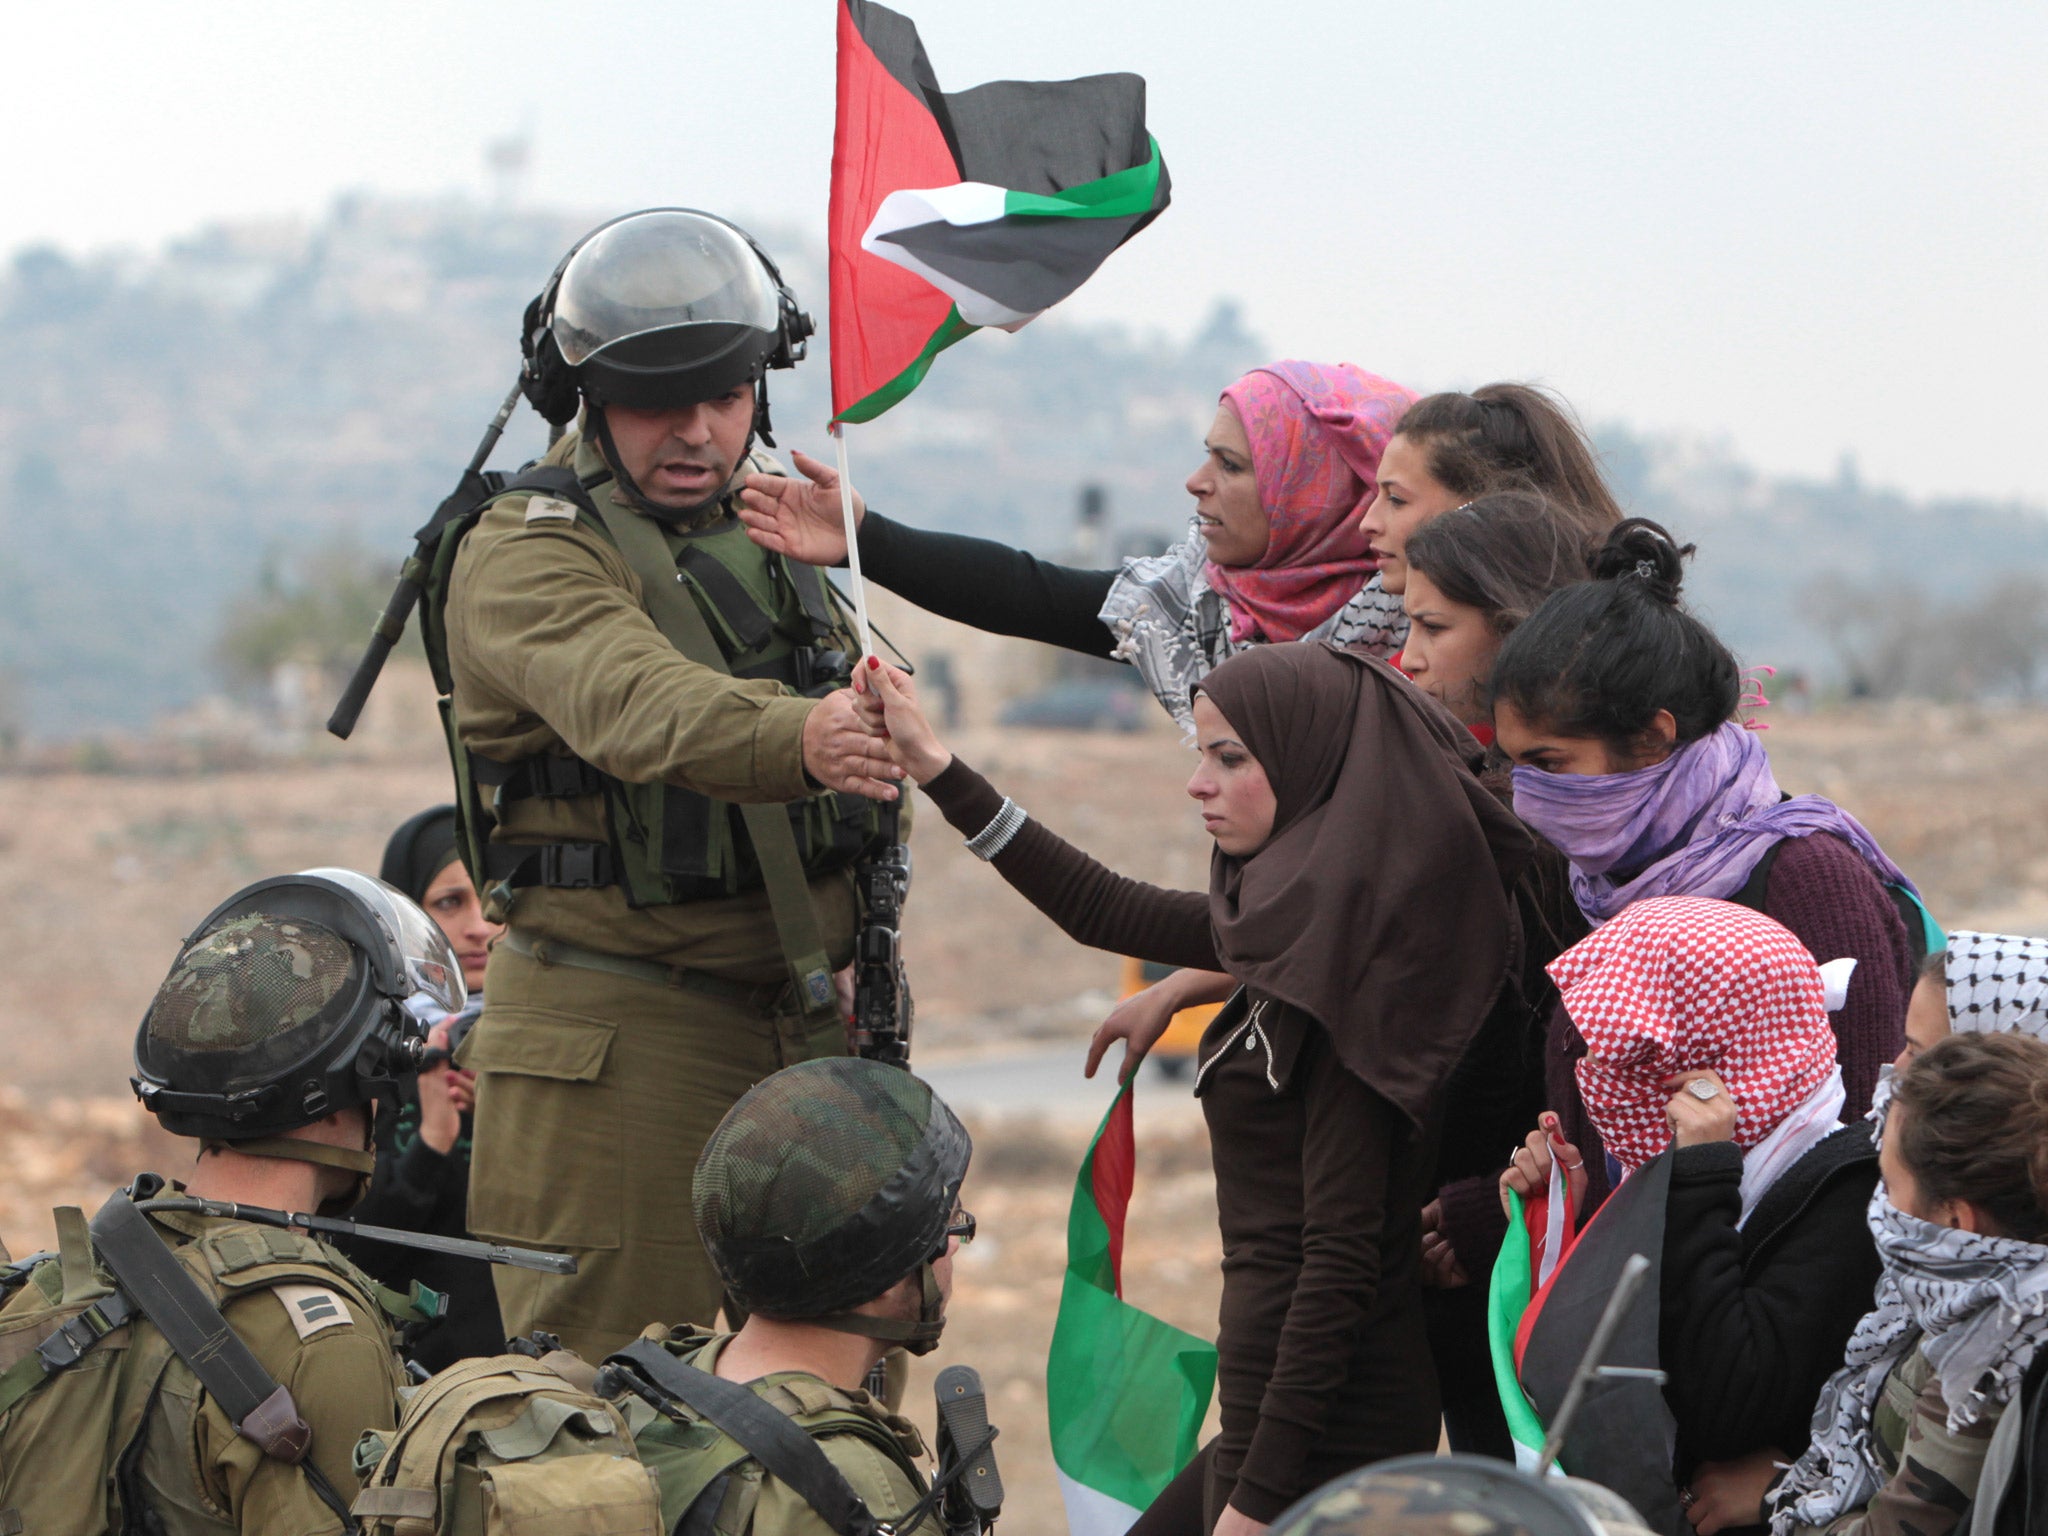 An Israeli soldier gestures to female protesters to move away during a demonstration against the building of a Jewish settlement in the West Bank, earlier this month